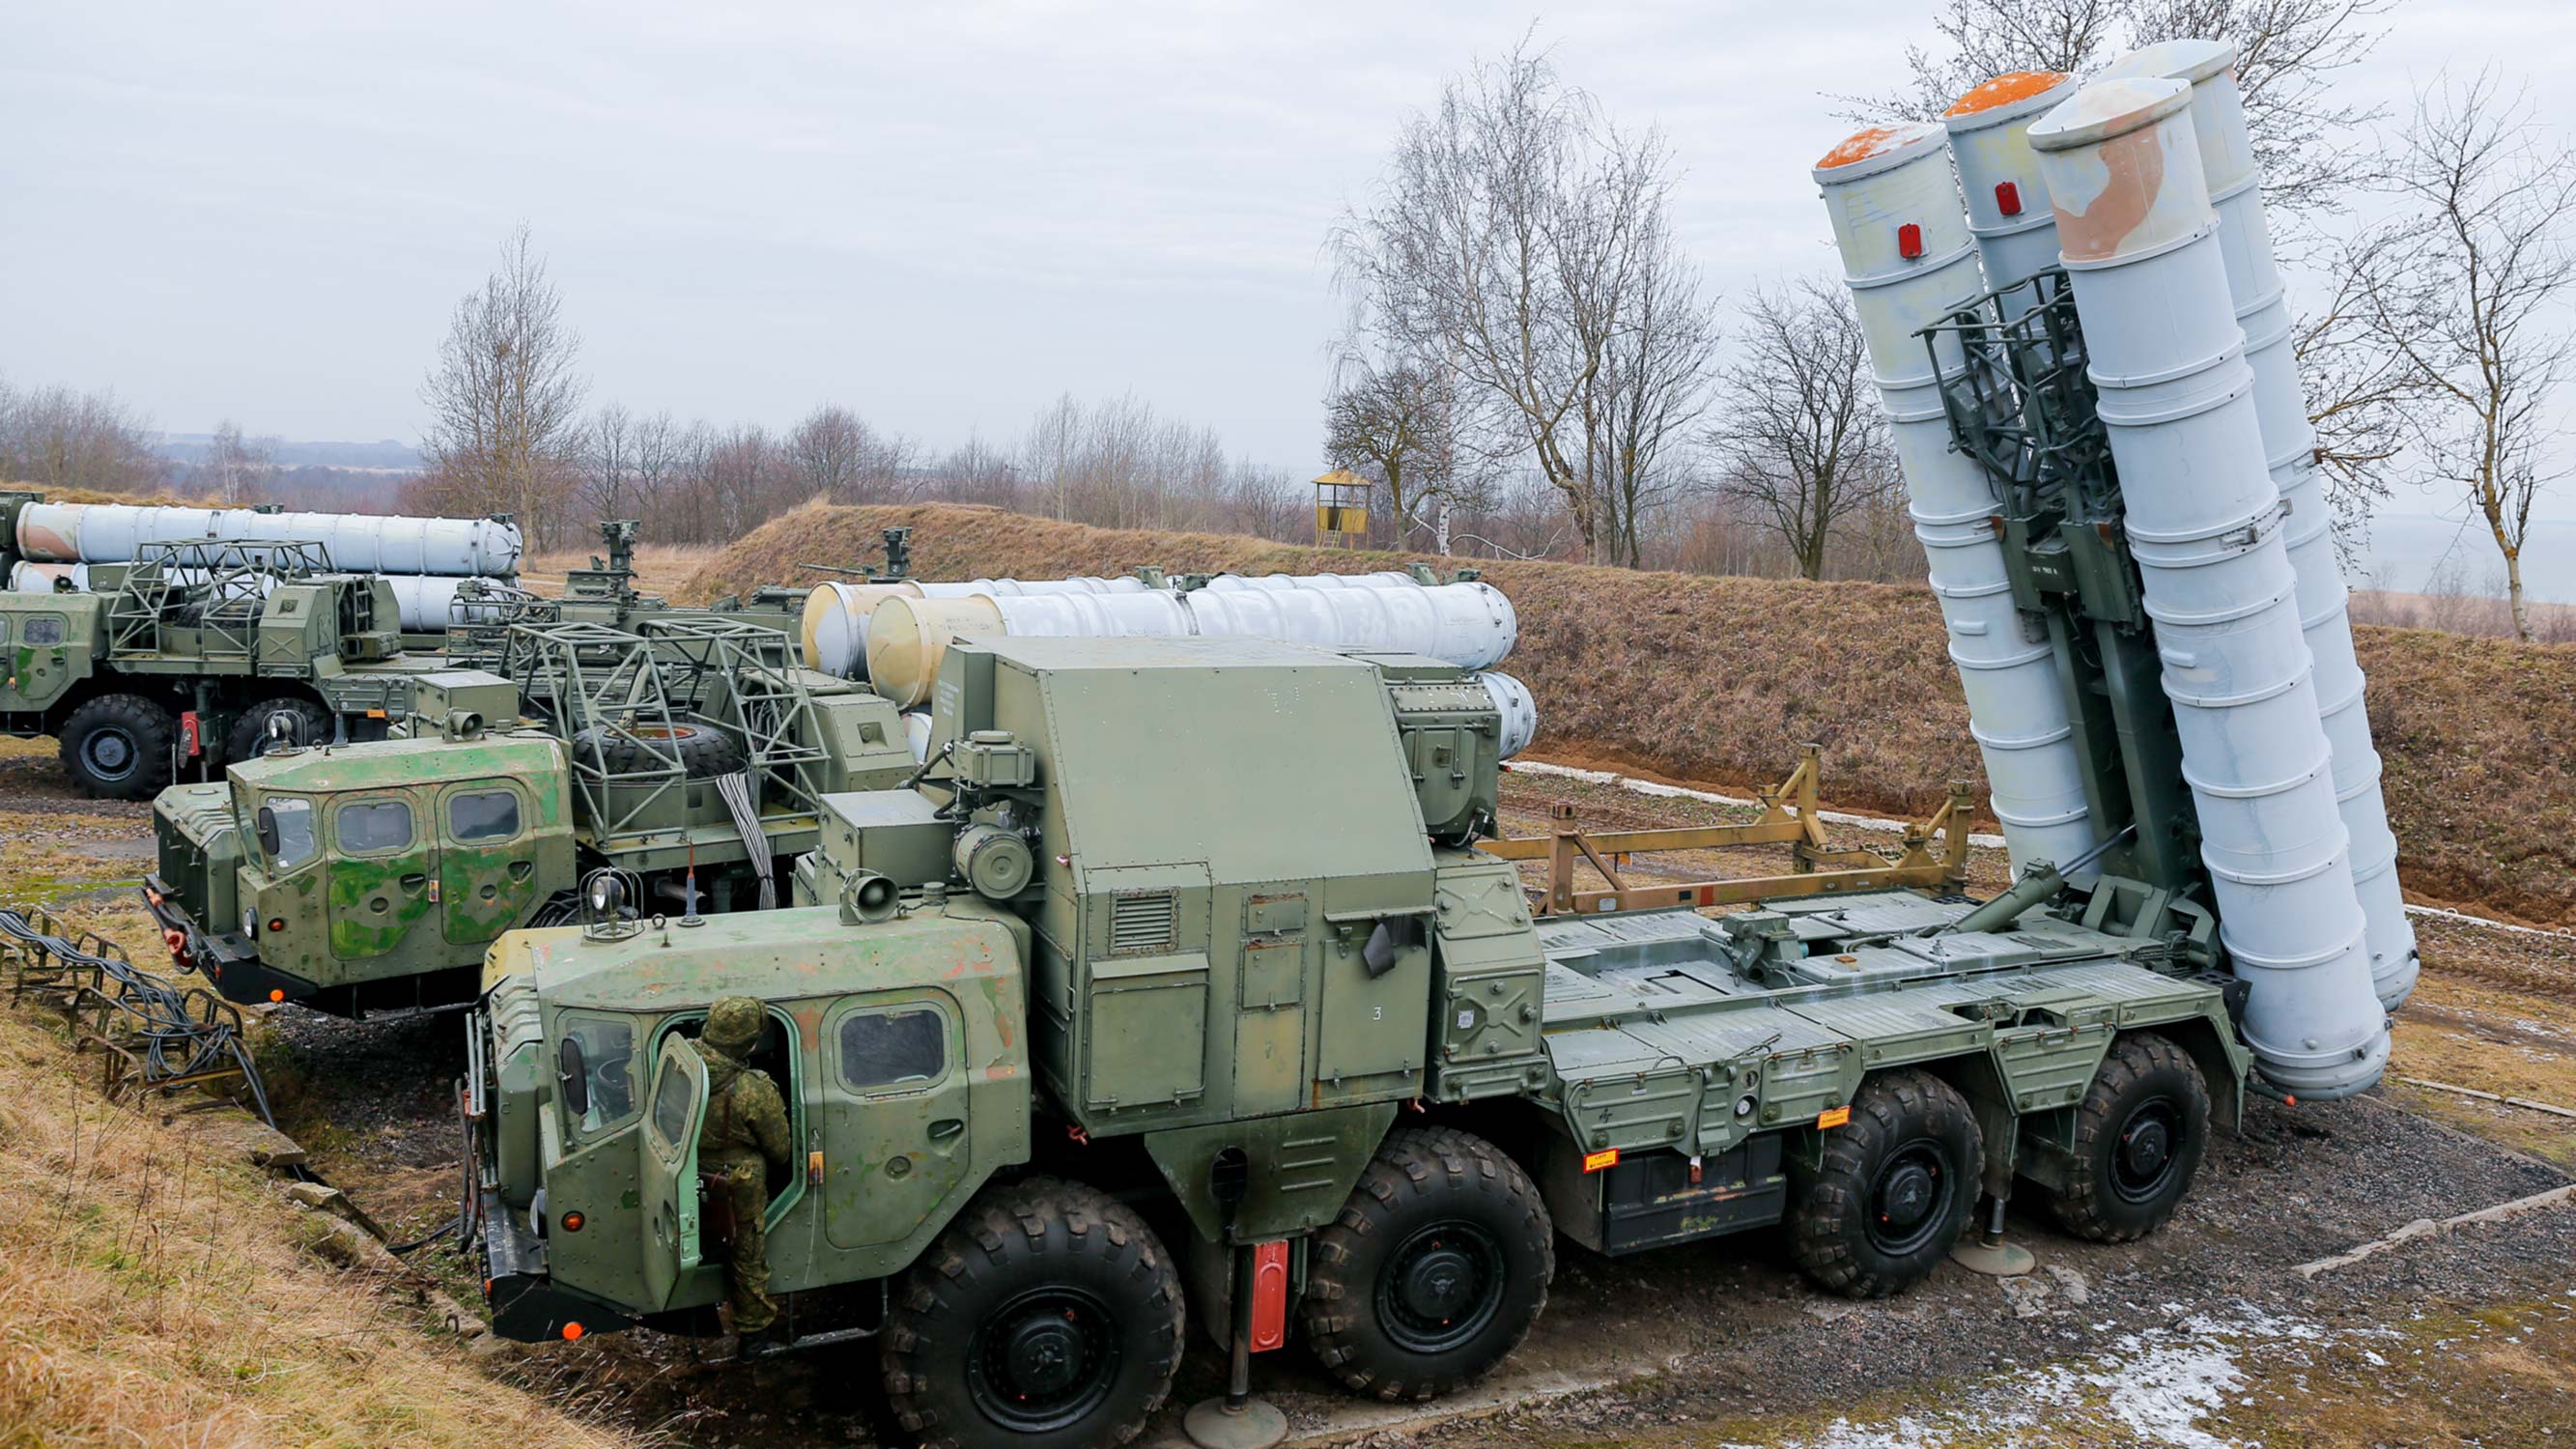 Russian S-300 air defense missile systems